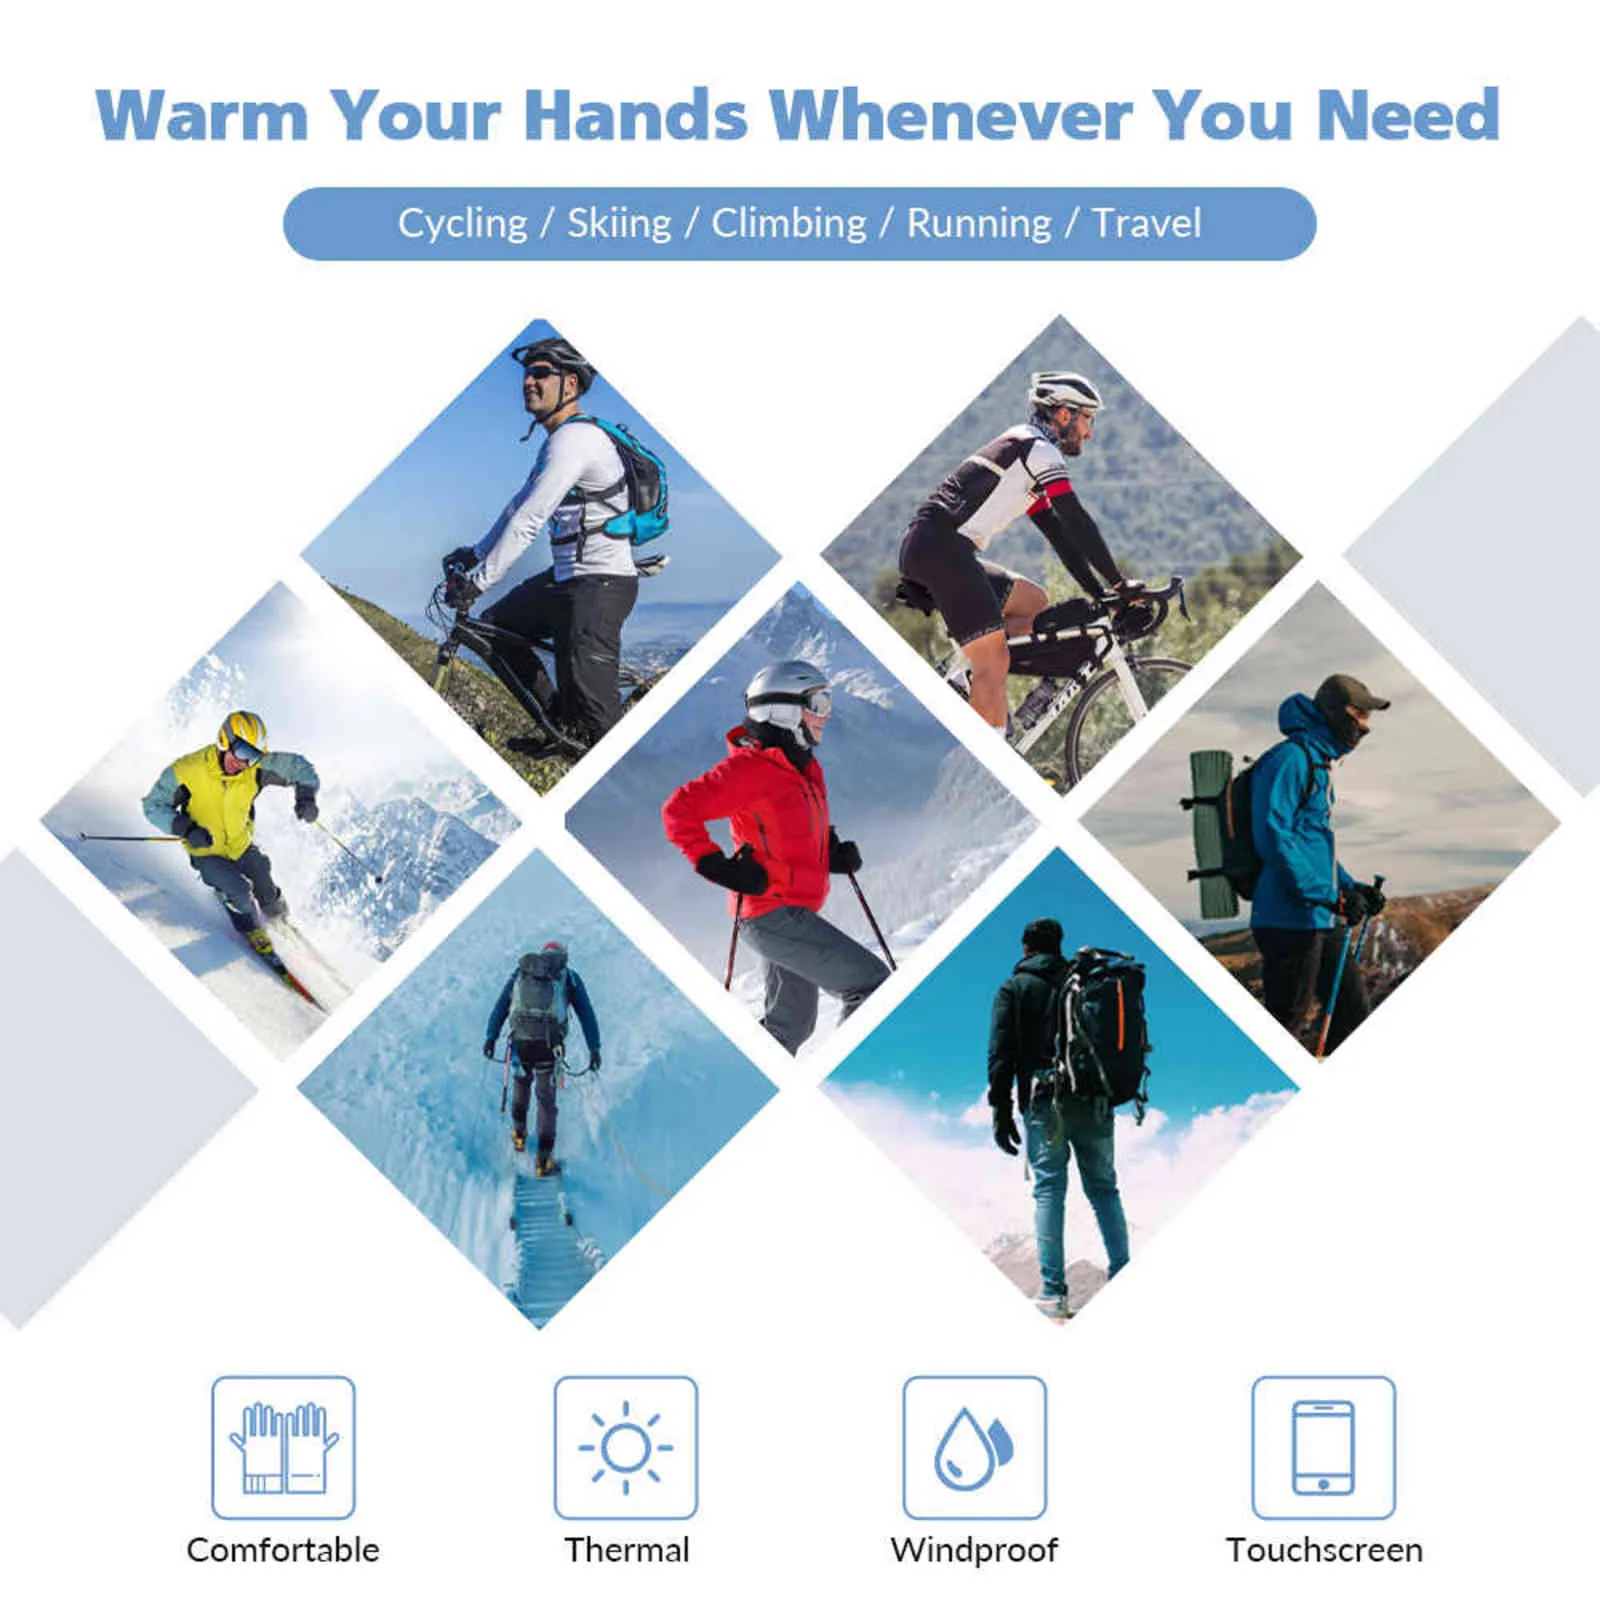 Outdoor Winter Gloves motorcycle Men Waterproof Thermal Guantes Non-Slip Touch Screen Cycling Bike 211124314i